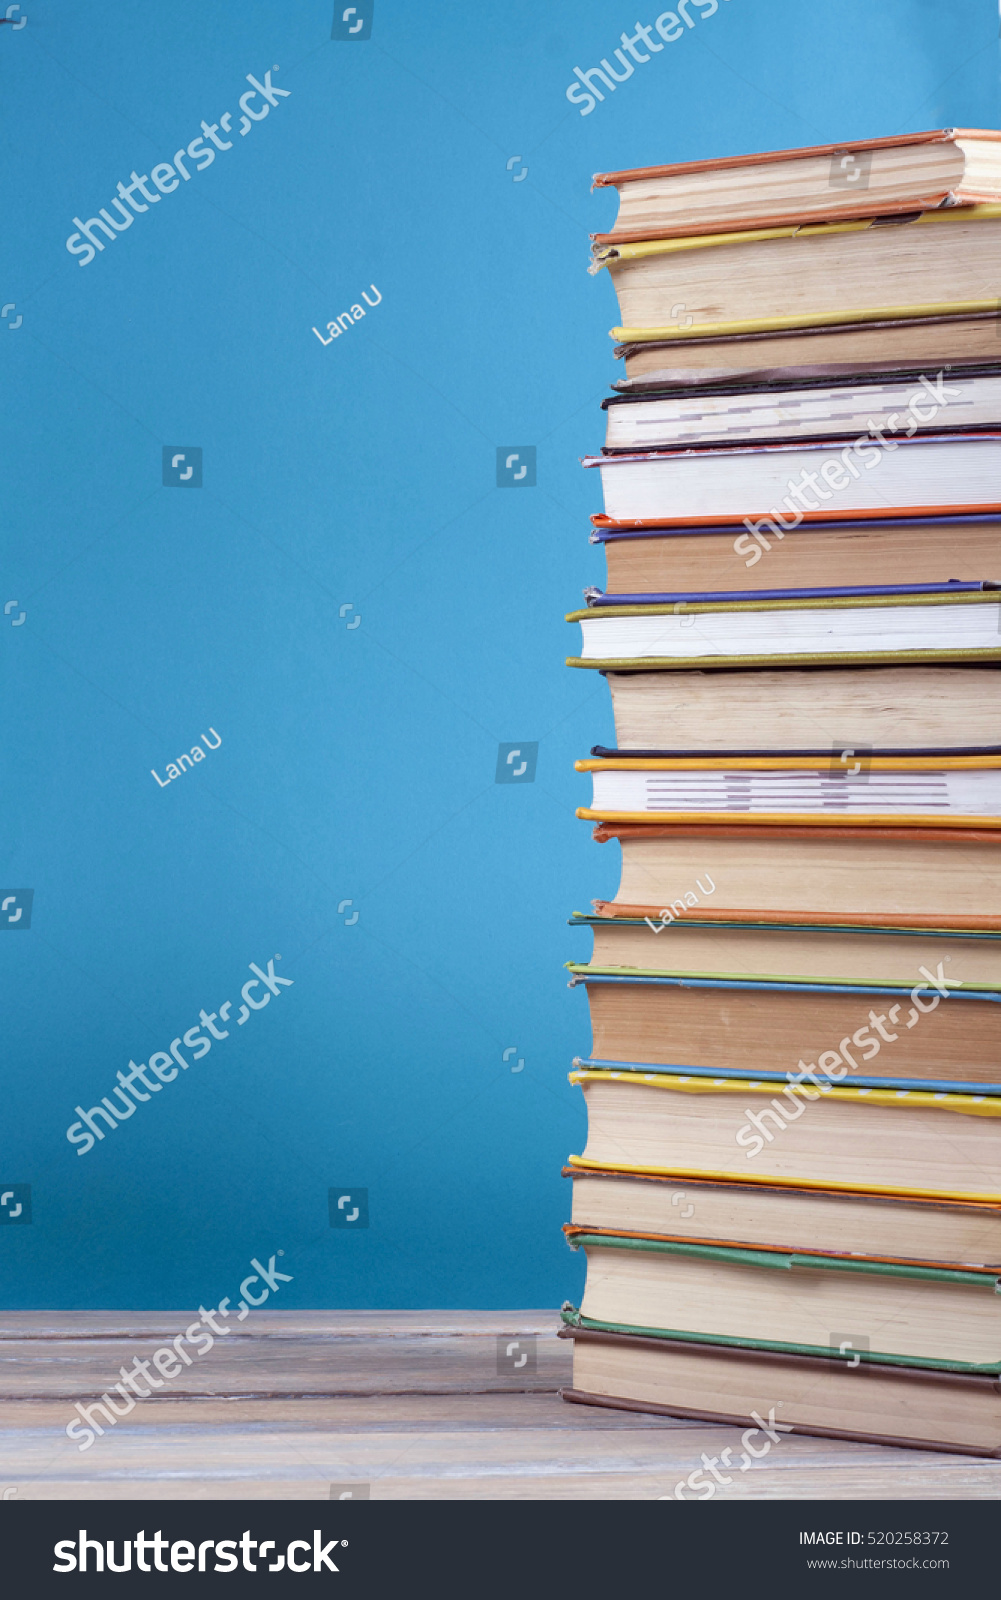 Book stack, hardback colorful books on wooden table and blue background. Back to school. Copy space for text. Education concept. #520258372